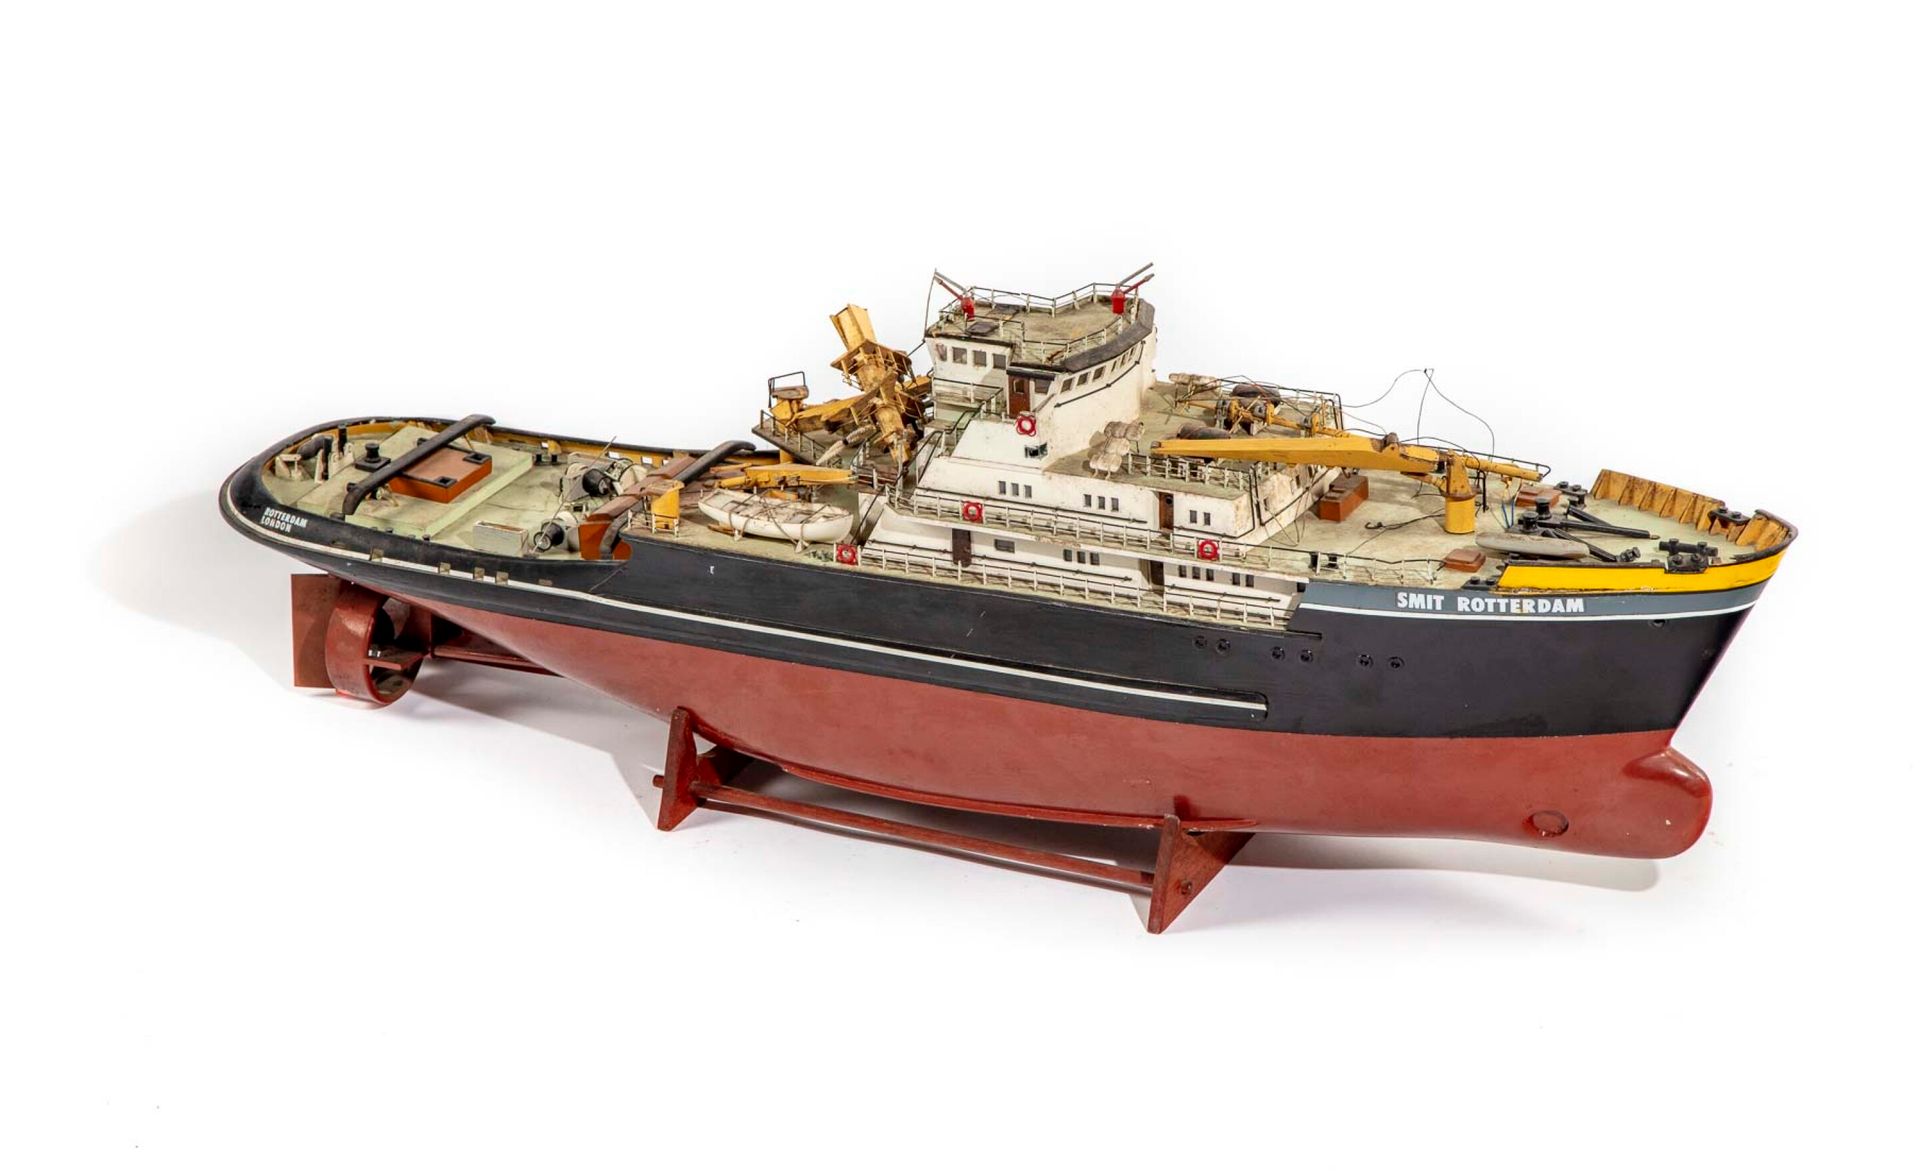 SMIT ROTTERDAM Model of the tug "SMIT ROTTERDAM", in painted wood

The masts in &hellip;